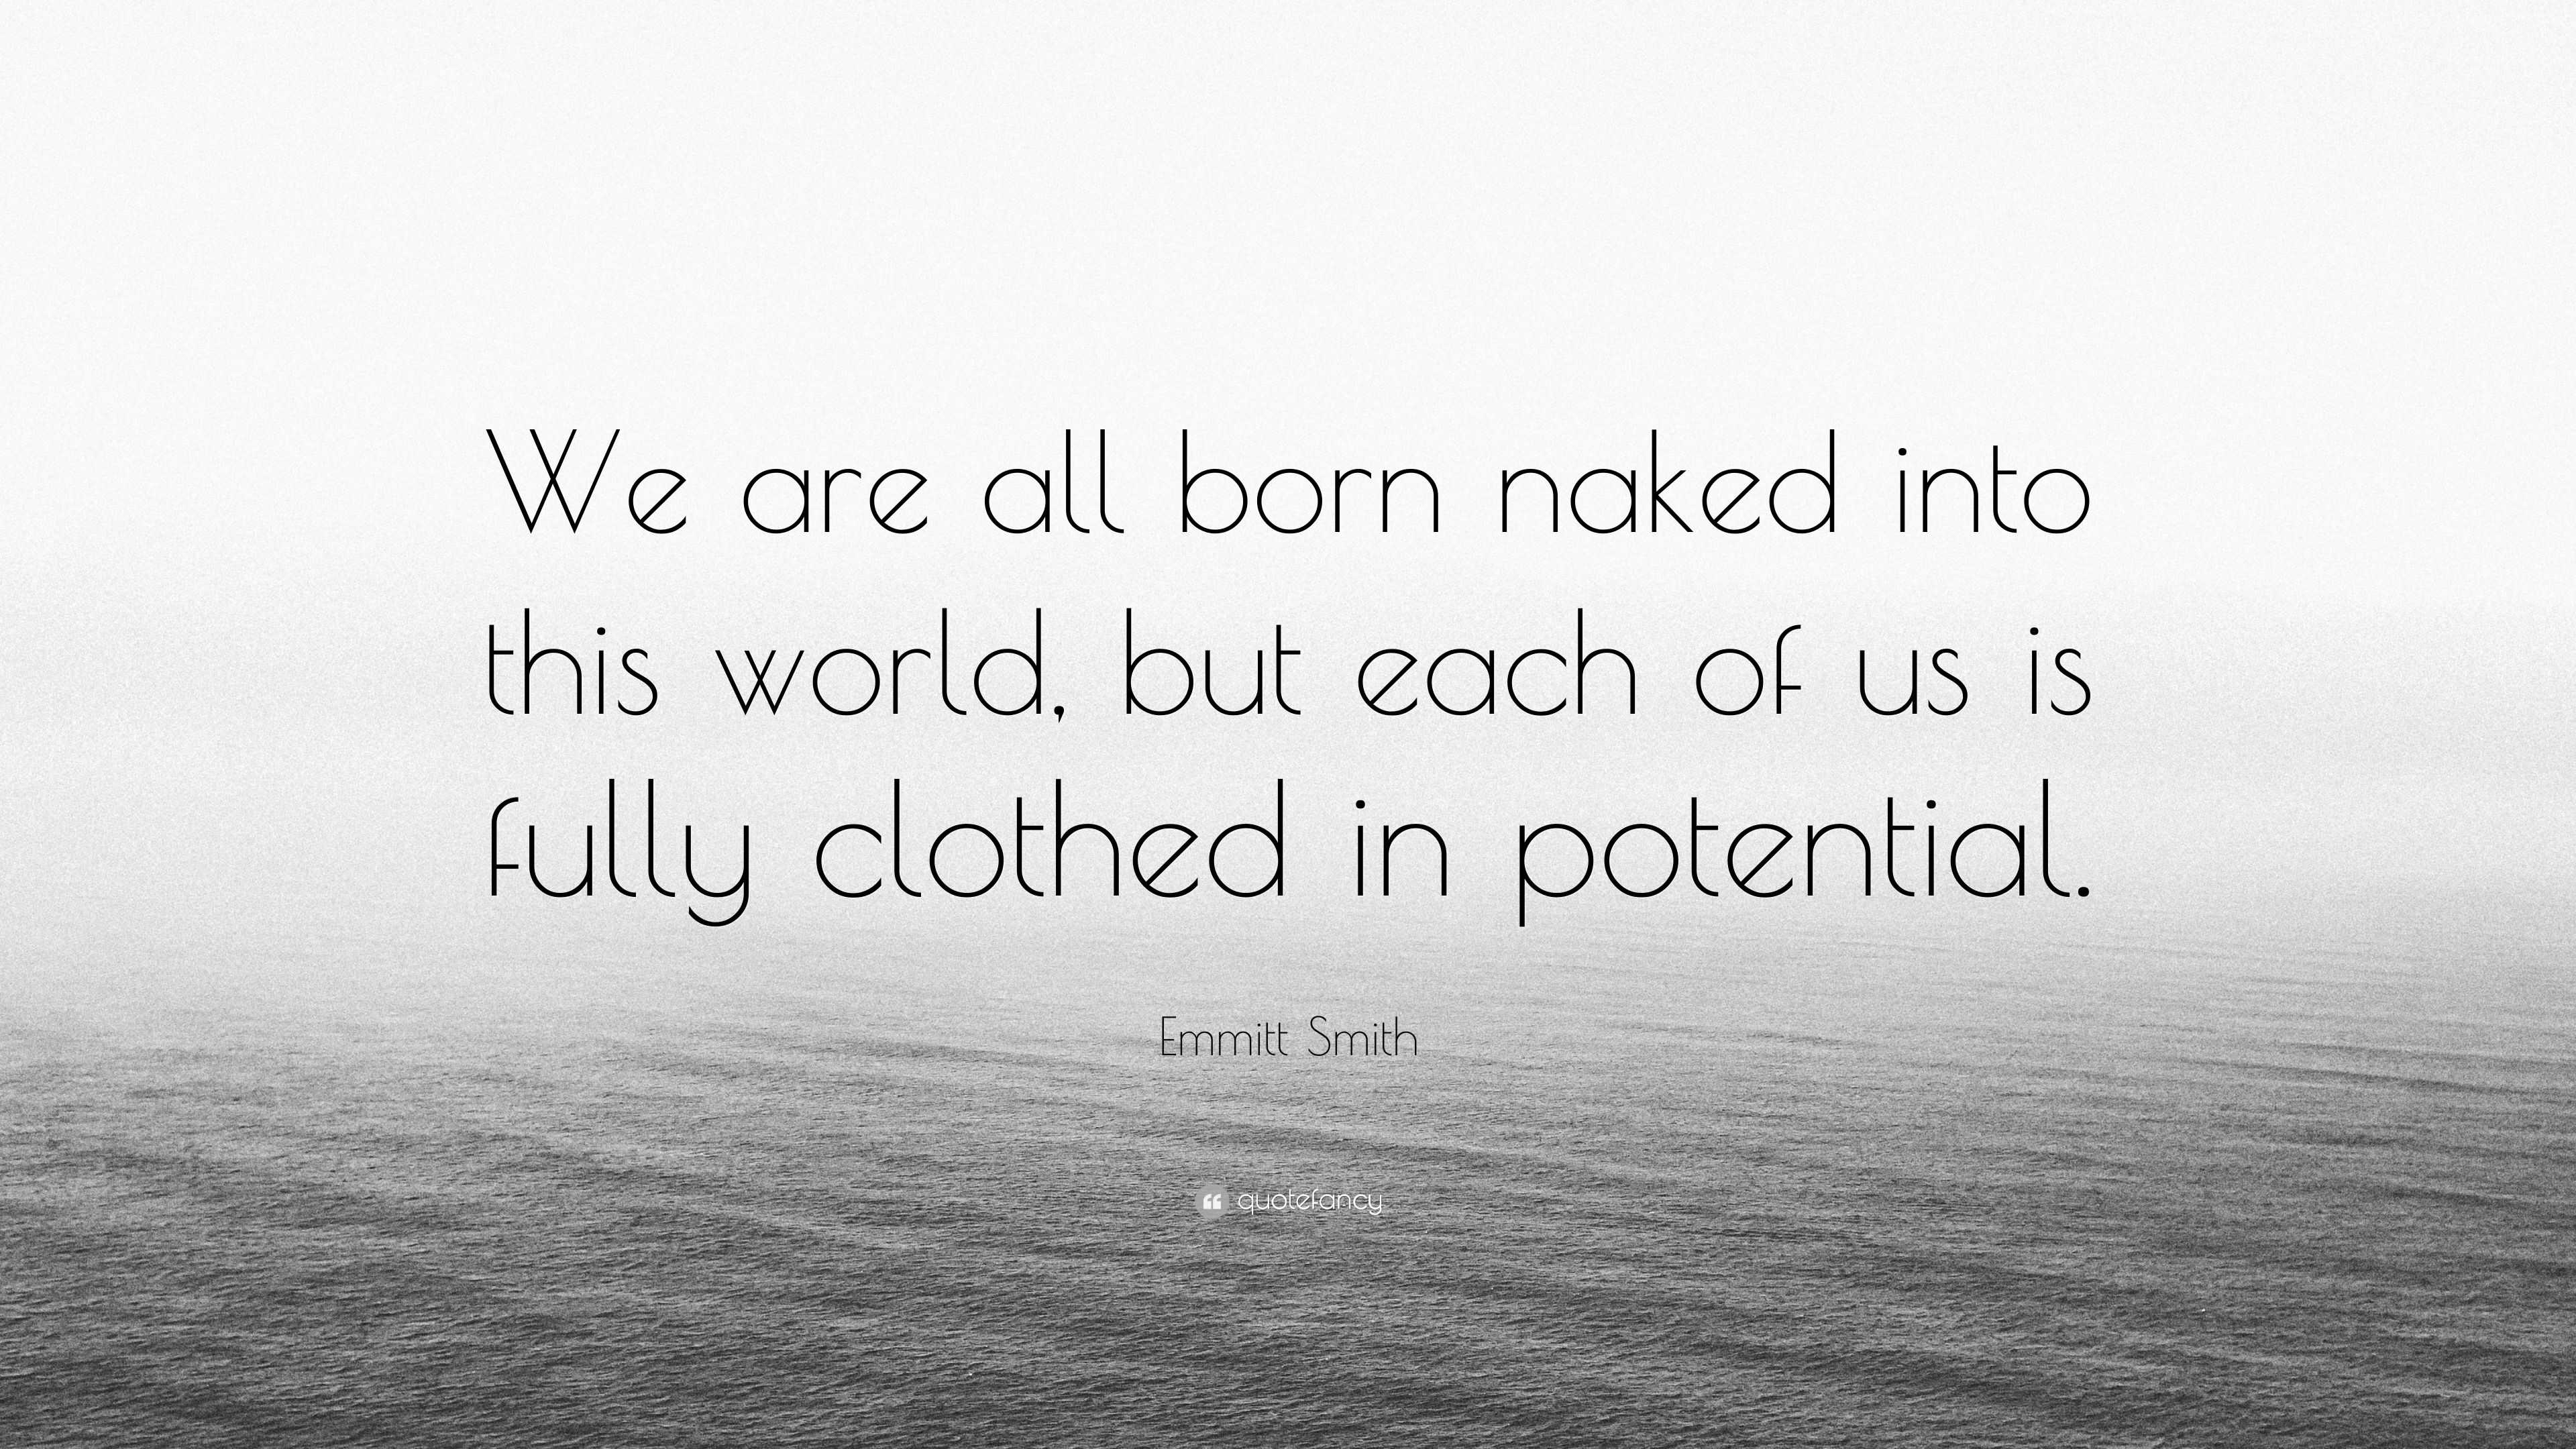 Emmitt Smith Quote We Are All Born Naked Into This World But Each Of Us Is Fully Clothed In